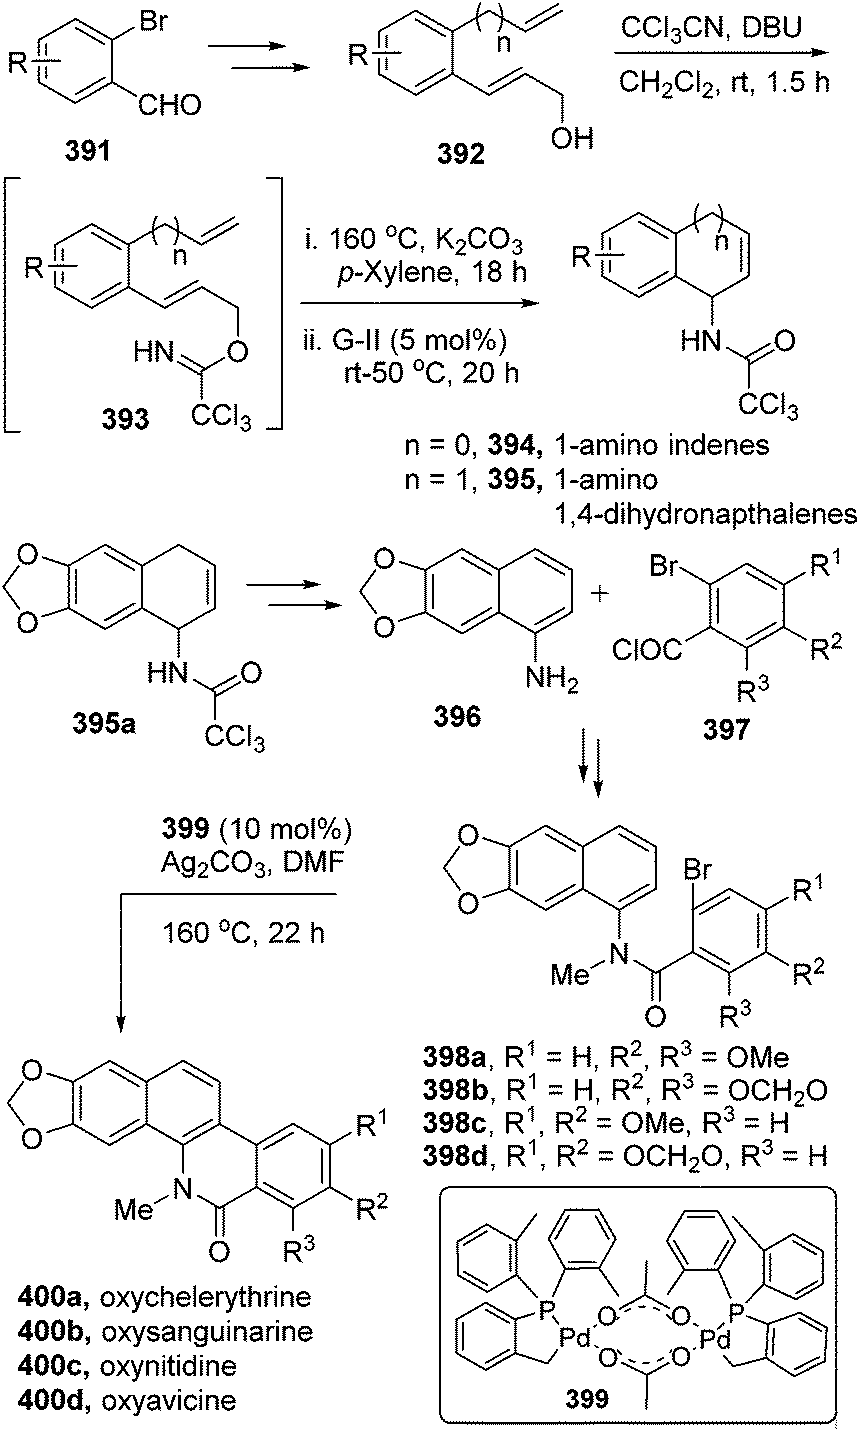 Recent Advances In The Overman Rearrangement Synthesis Of Natural